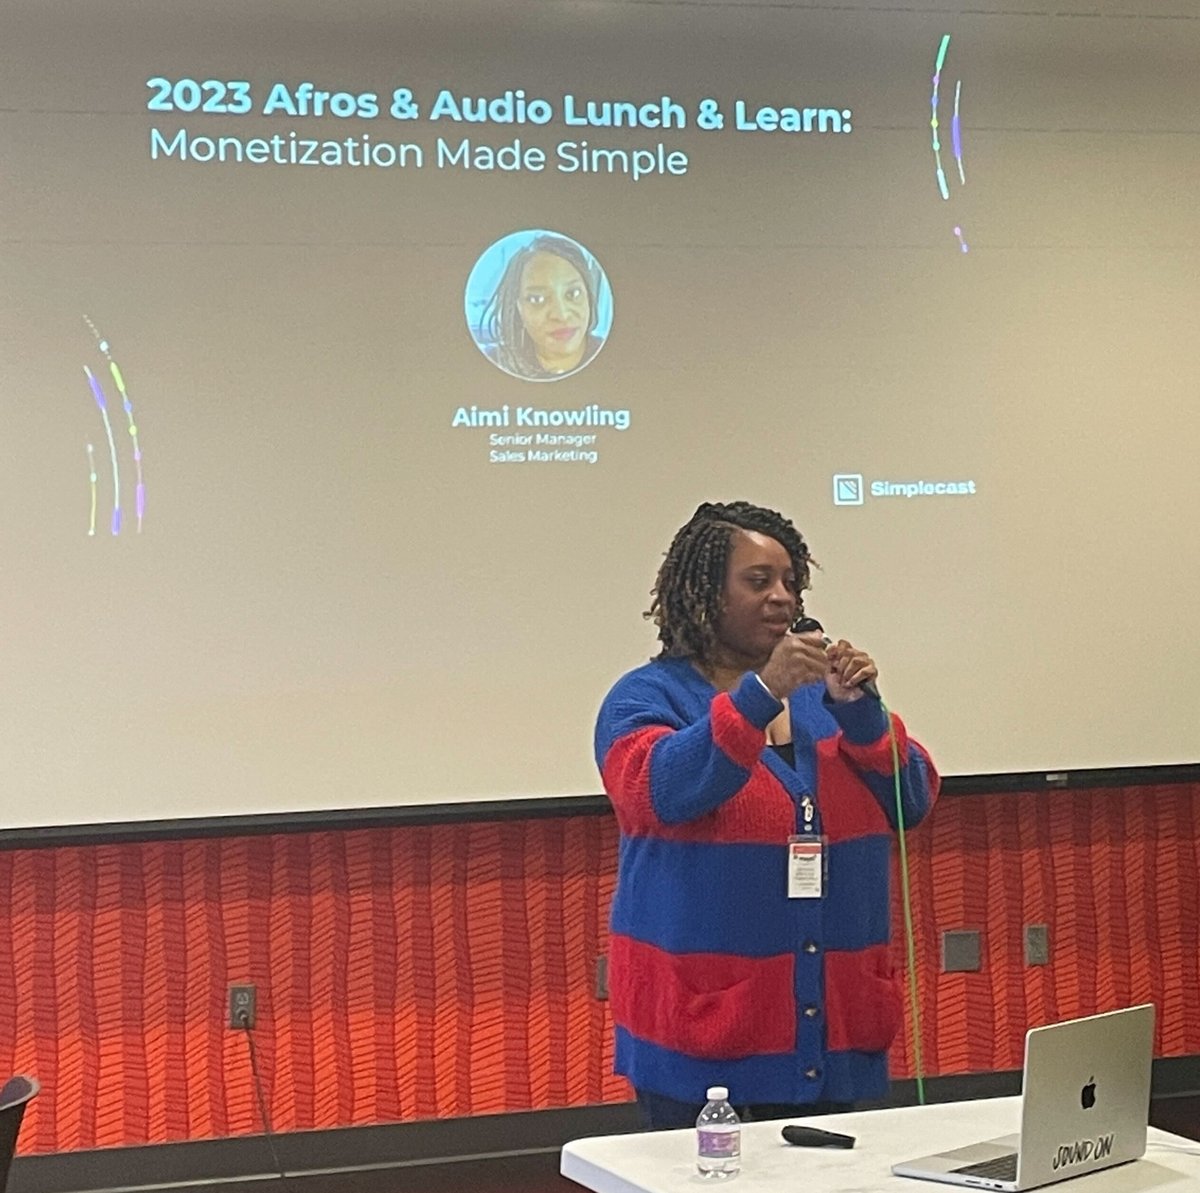 Aimi at Afros & Audio 2023 presenting a talk at the Lunch and Learn about Monetization Made Simple.